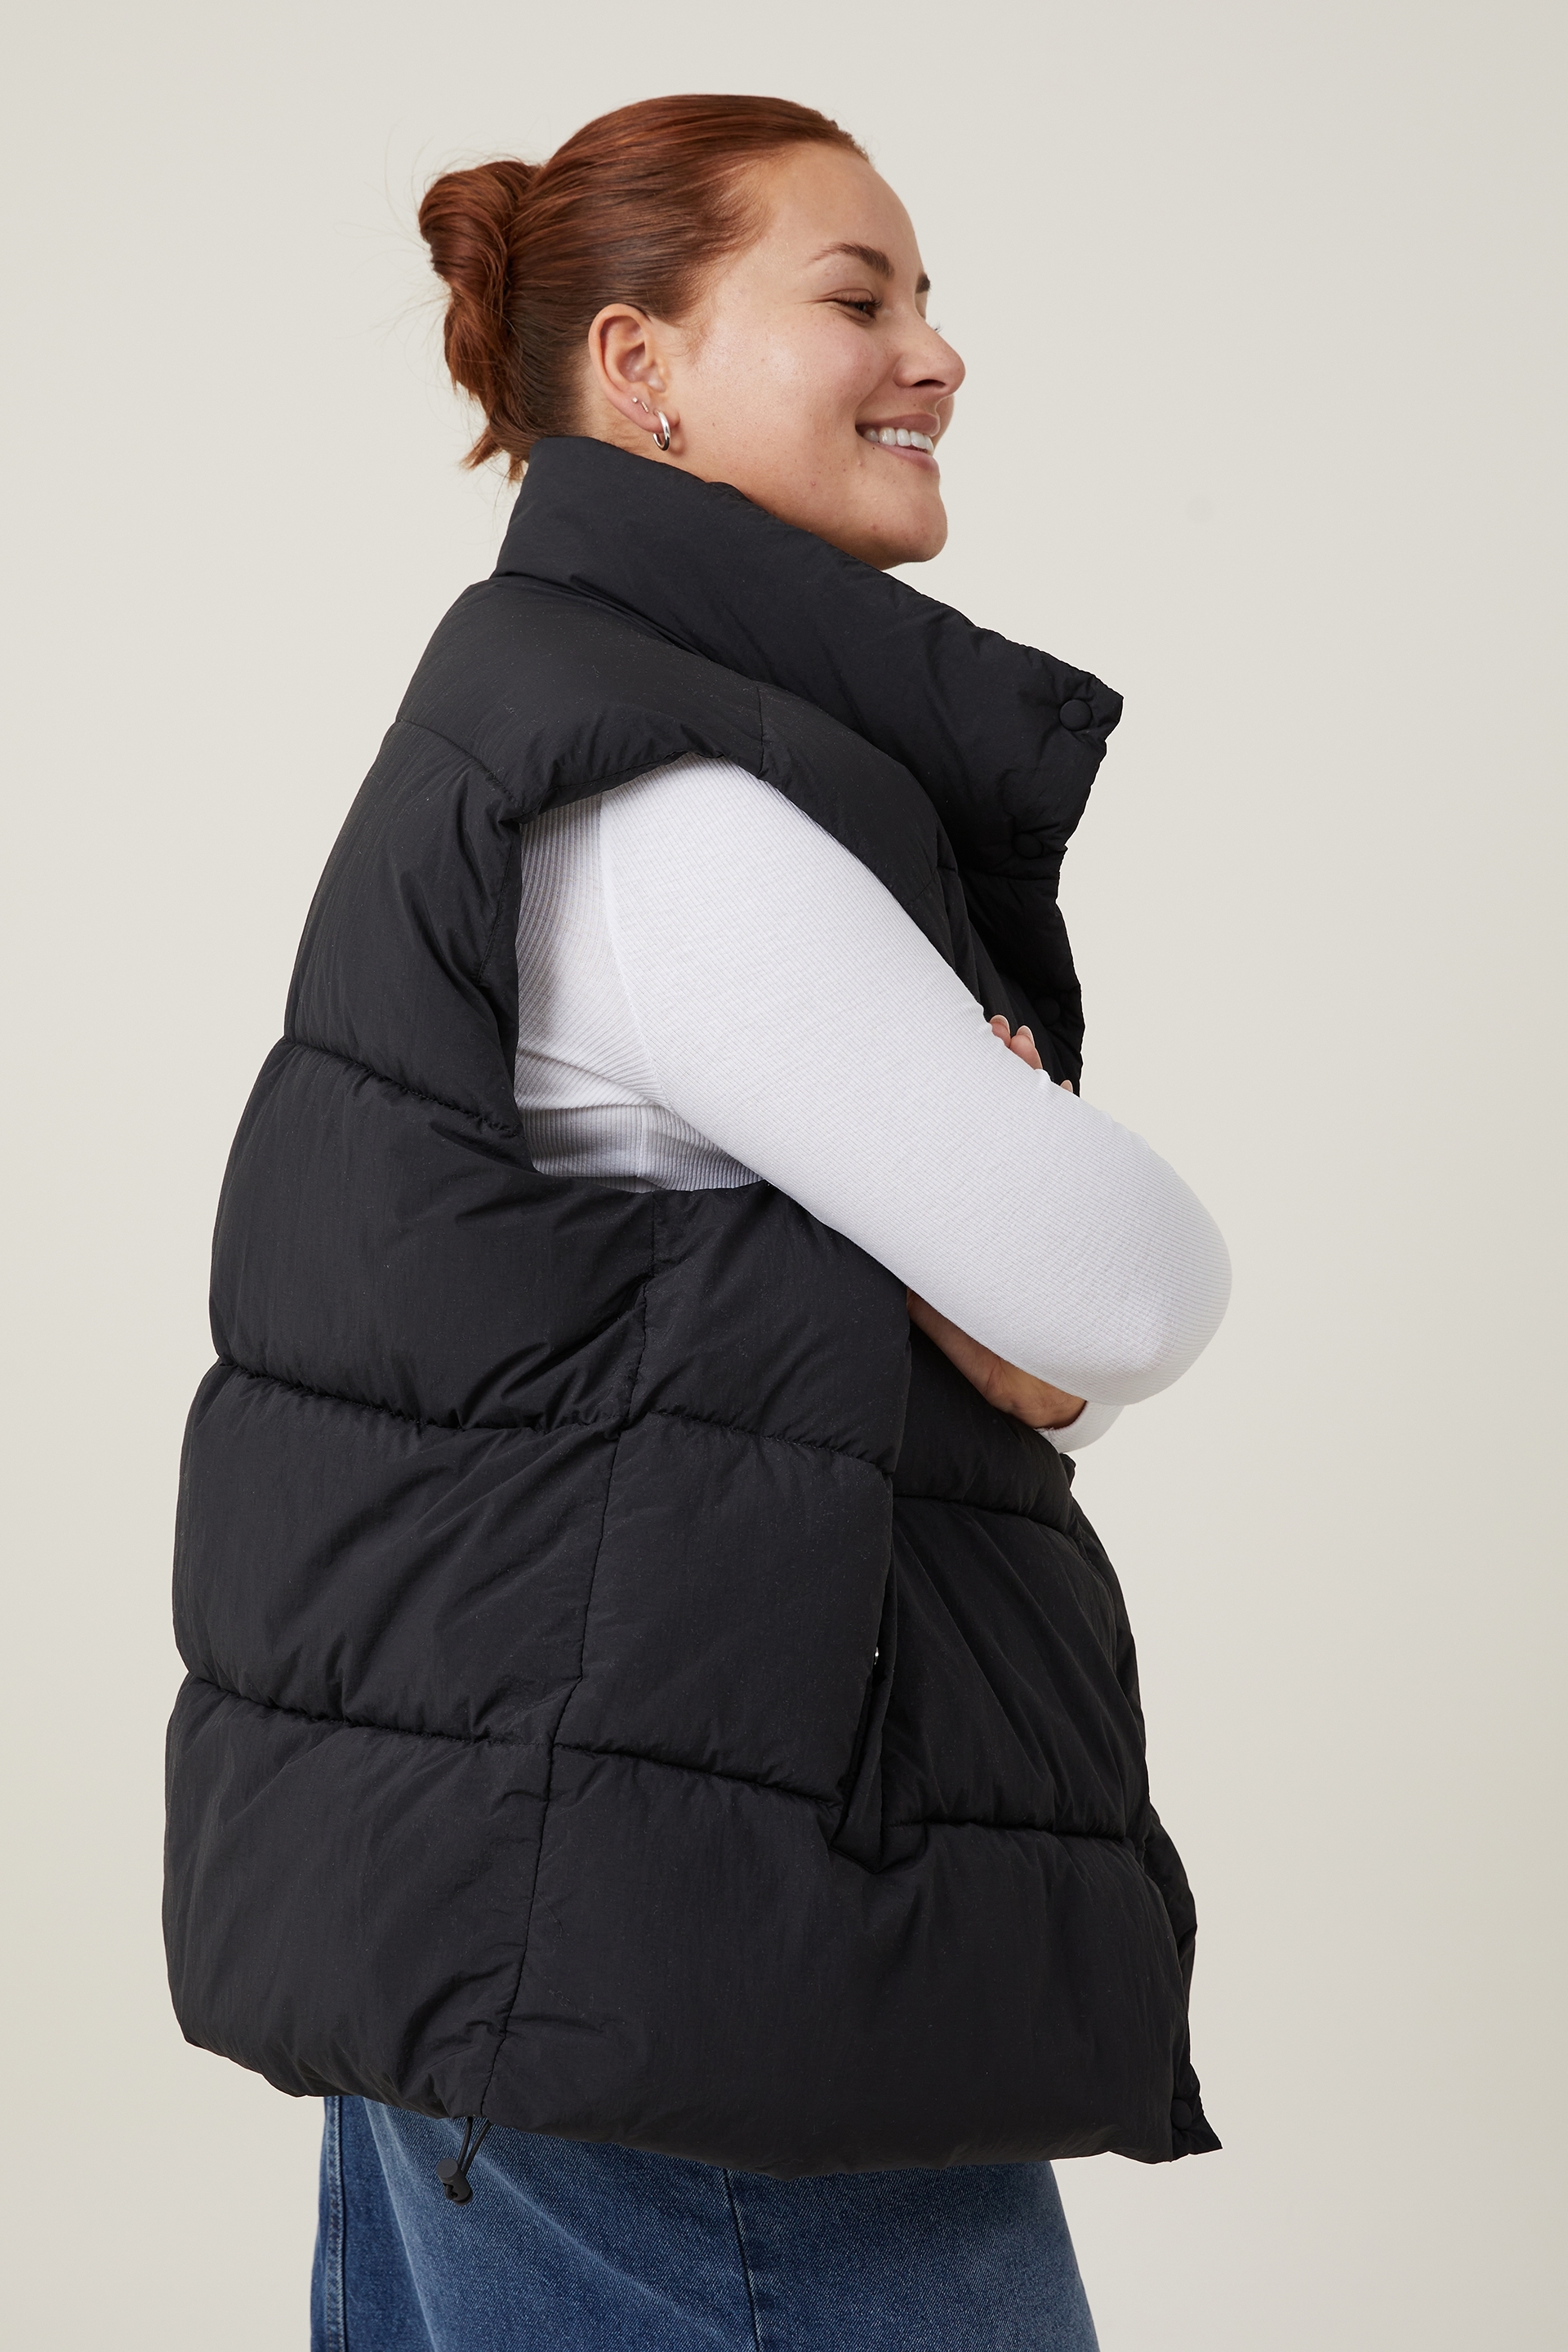 Women's Long Puffer Vest with Hood - S.E.B. By SEBBY Tan Large